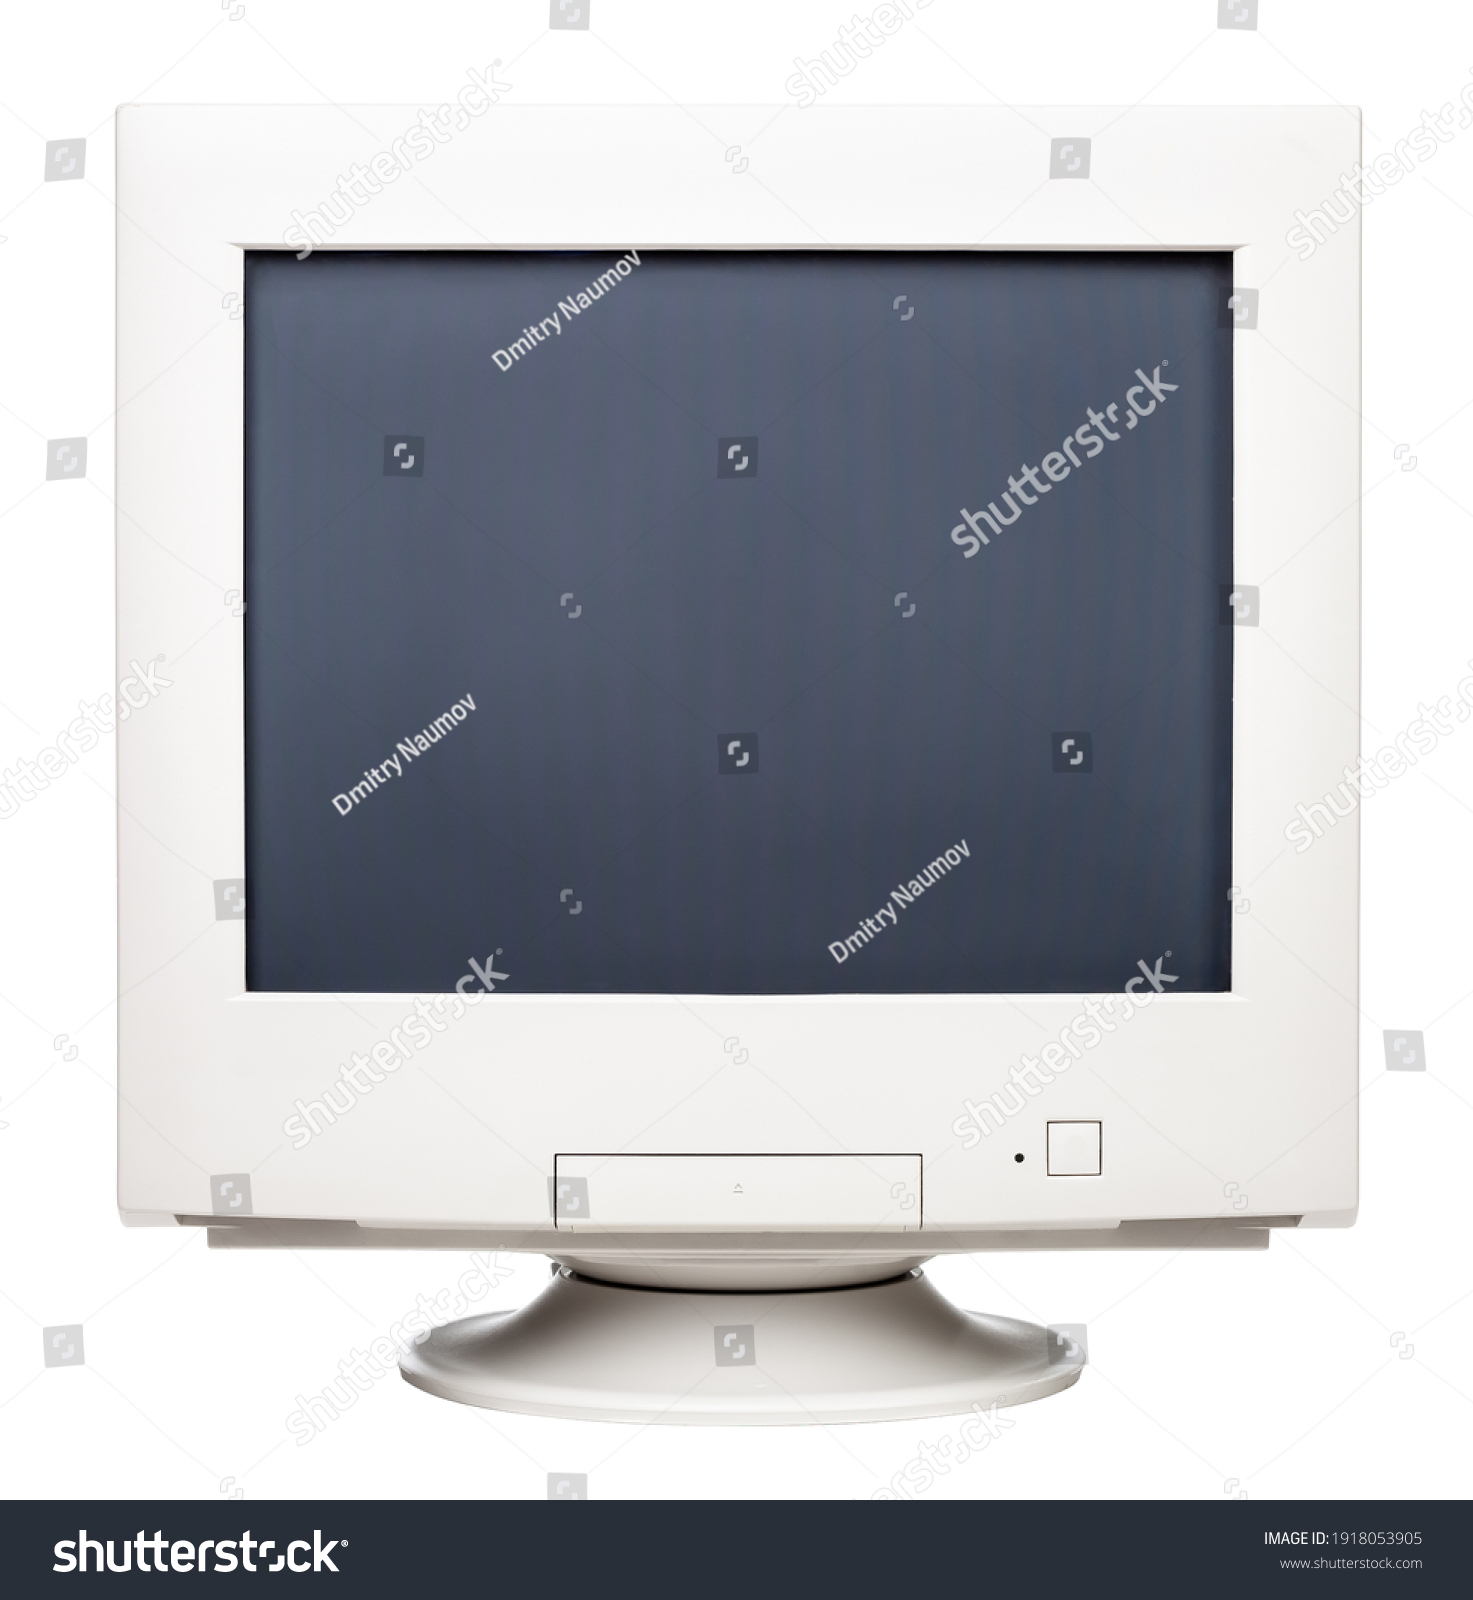 Obsolete CRT computer monitor with blank screen isolated on white background #1918053905